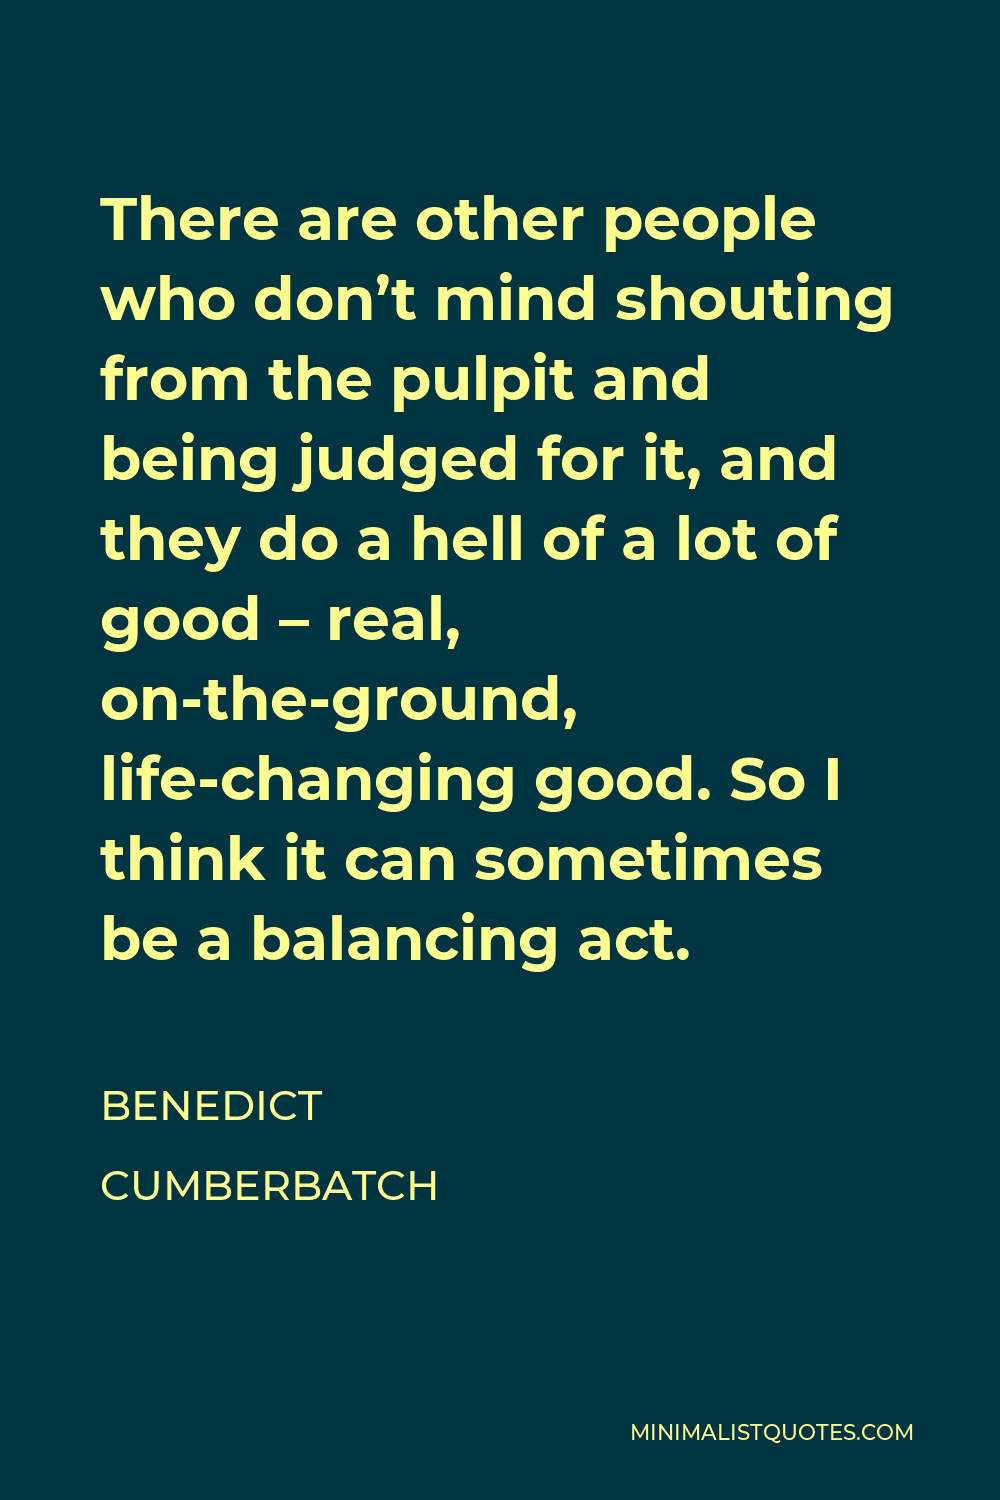 Benedict Cumberbatch Quote - There are other people who don’t mind shouting from the pulpit and being judged for it, and they do a hell of a lot of good – real, on-the-ground, life-changing good. So I think it can sometimes be a balancing act.